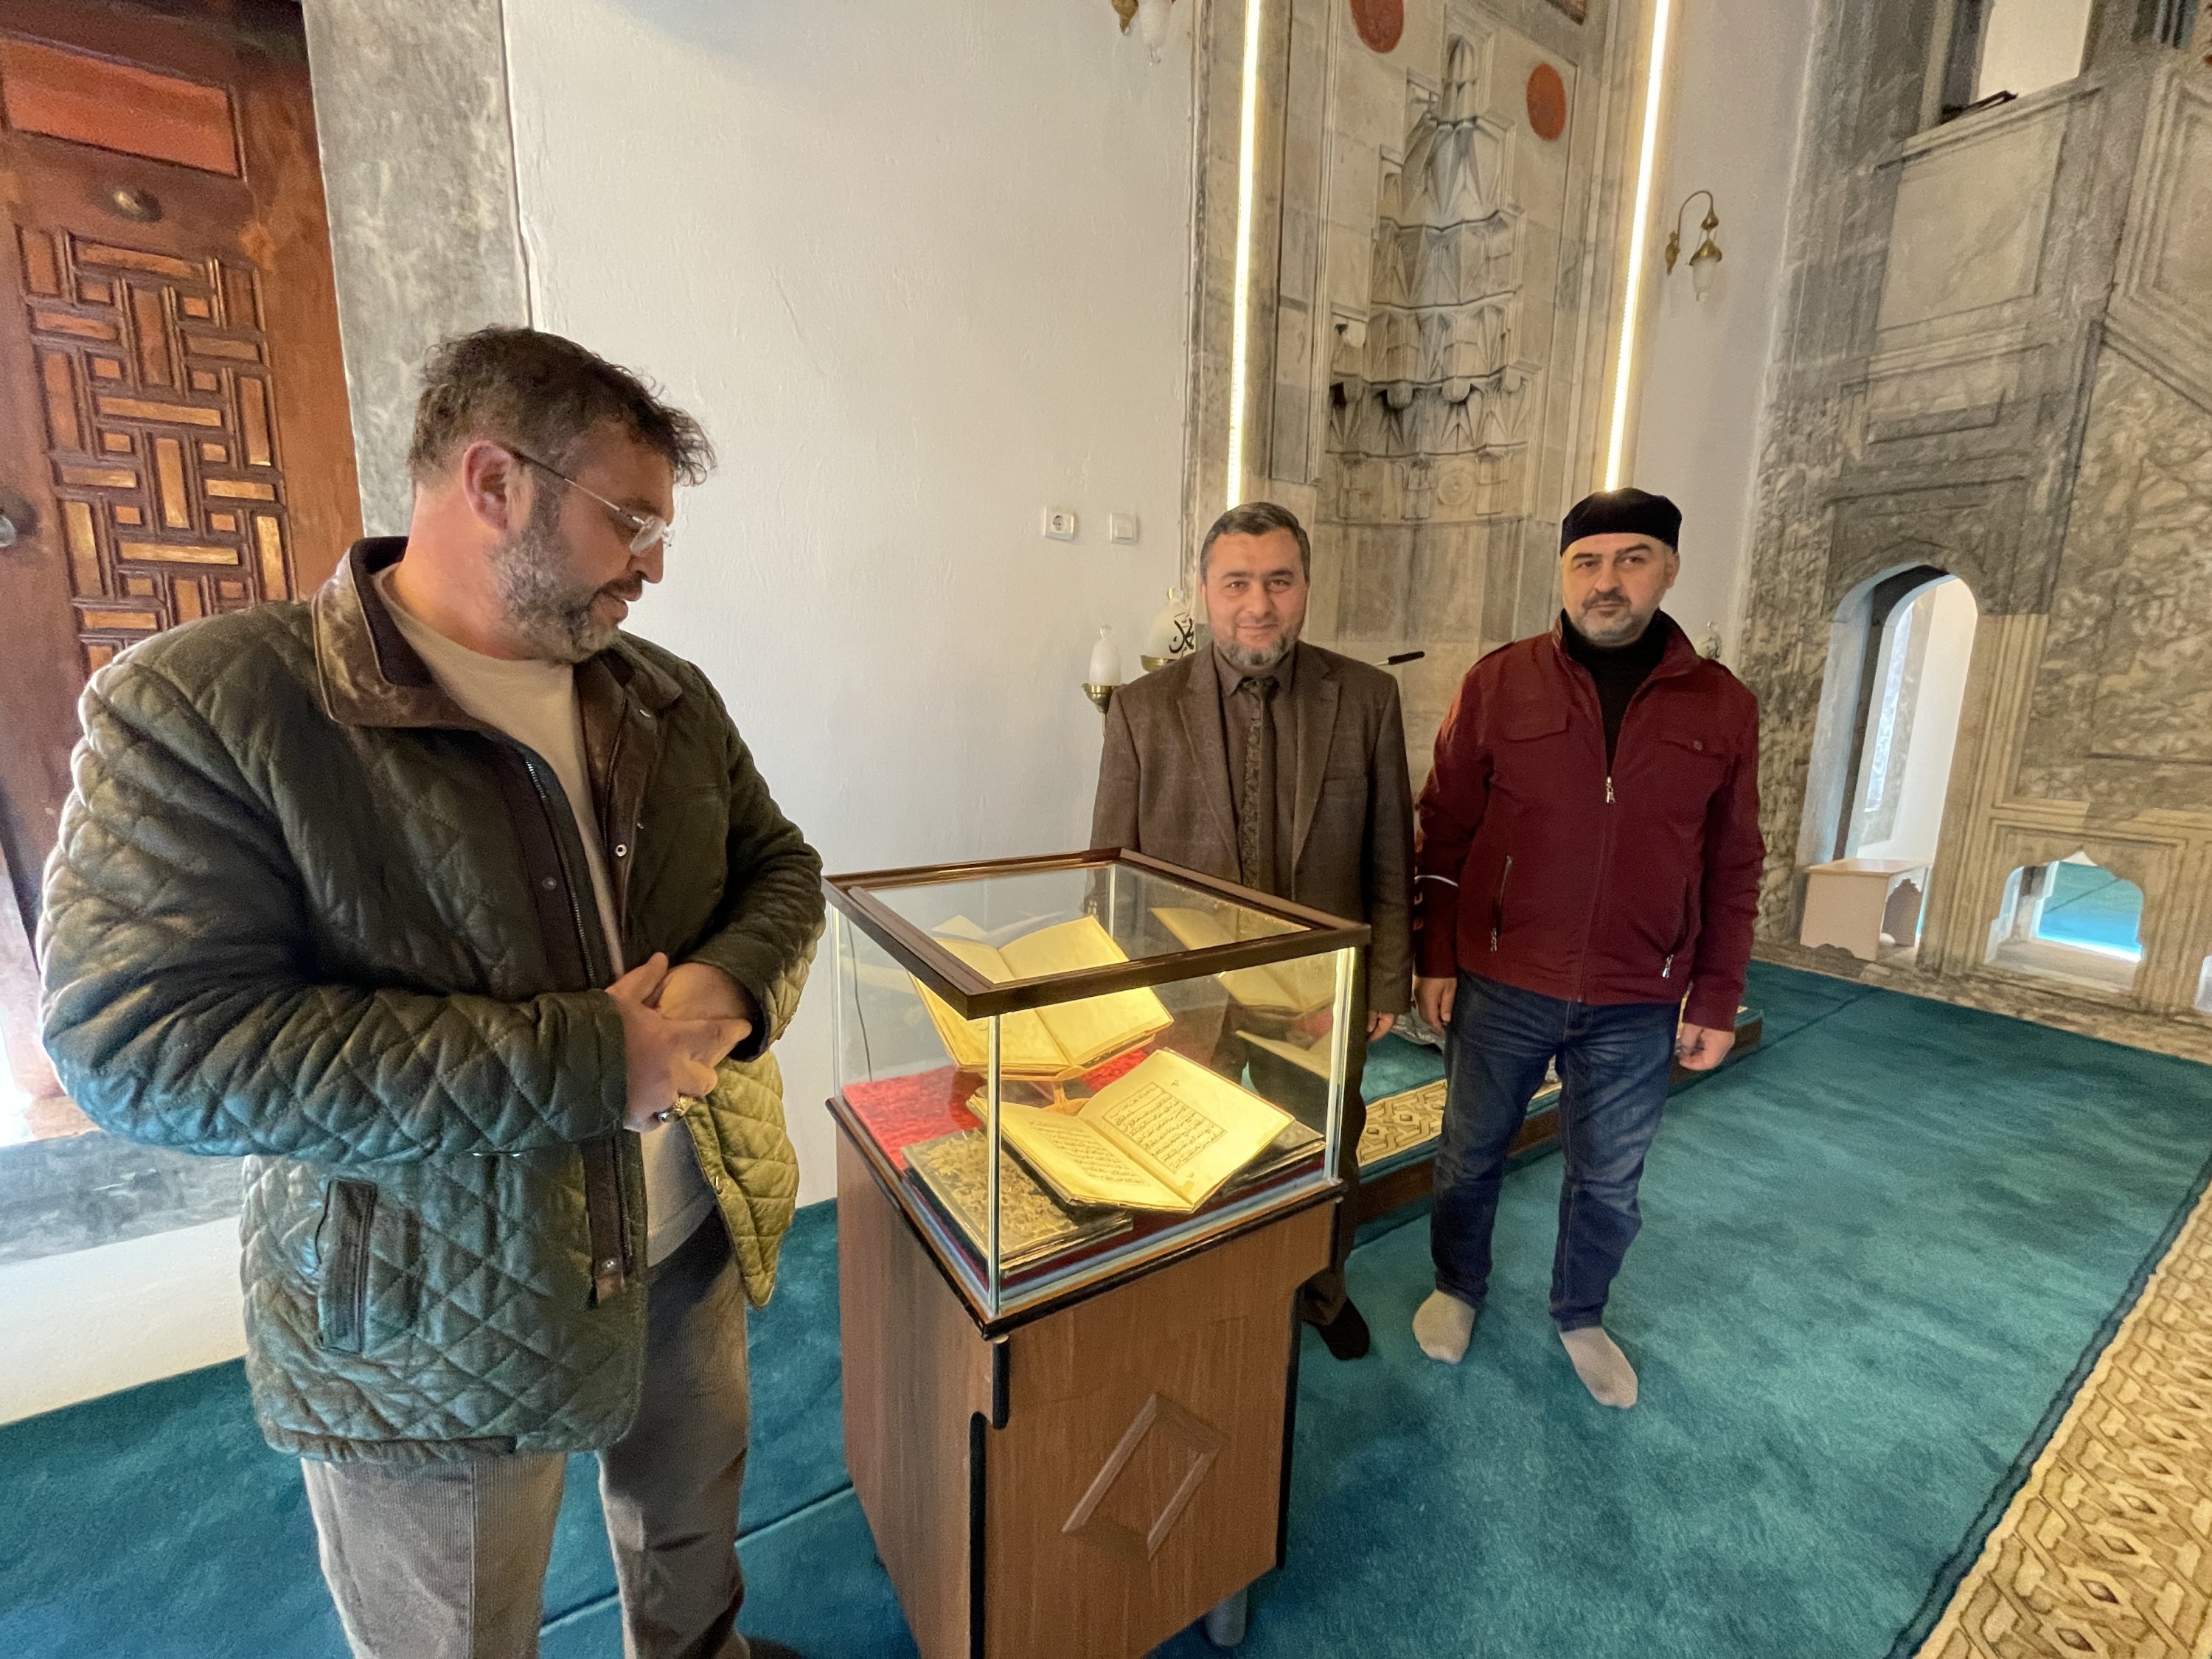 District Mufti Yunus Aydın (C) and colleagues with one of the copies of the Quran displayed inside the Sultan Selim Mosque in Konya's Karapınar district, Turkey, Nov. 23, 2021 (AA Photo)